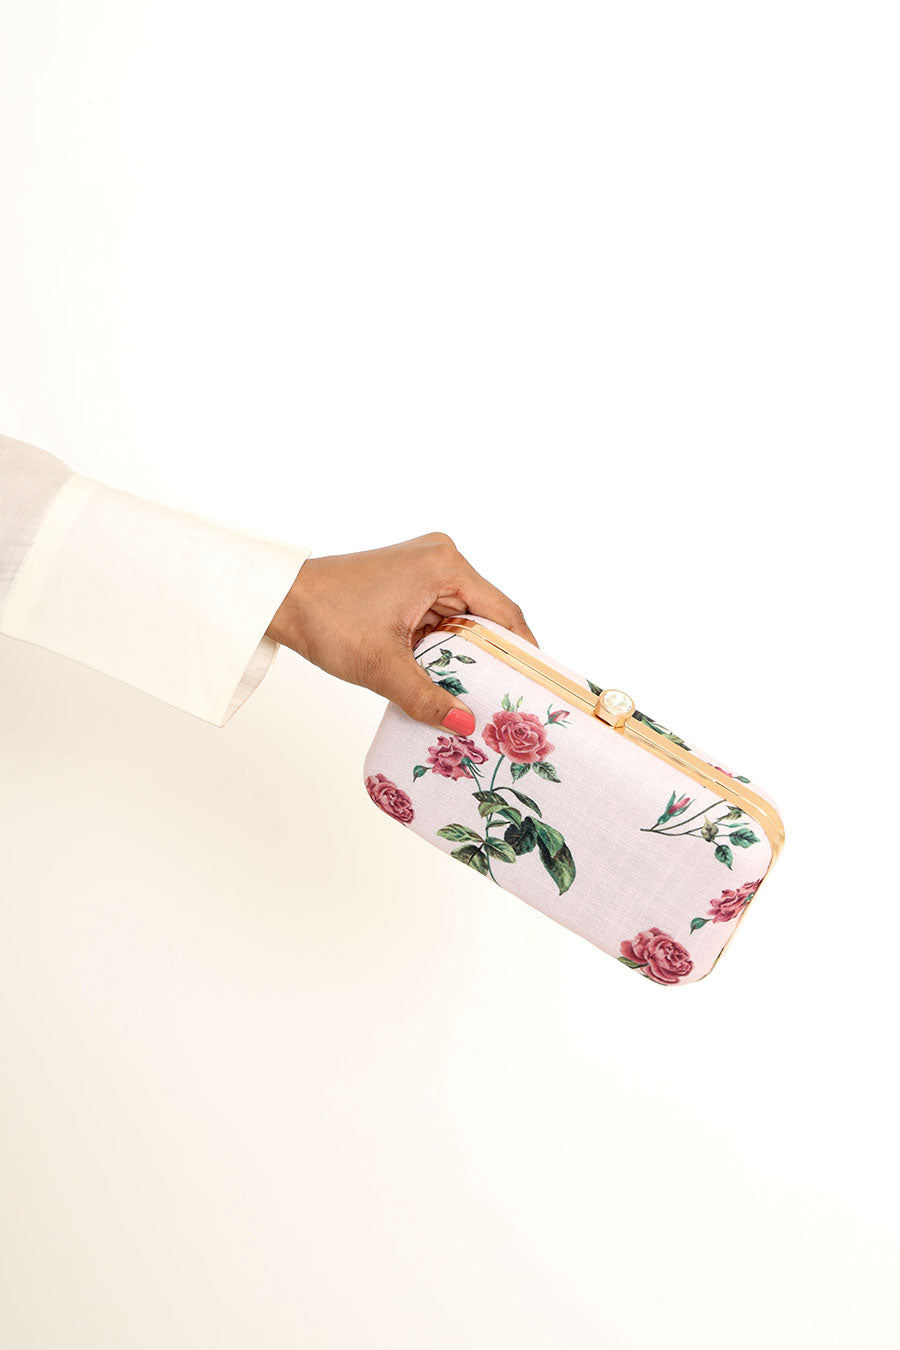 Soft Pink Berry Floral Clutch